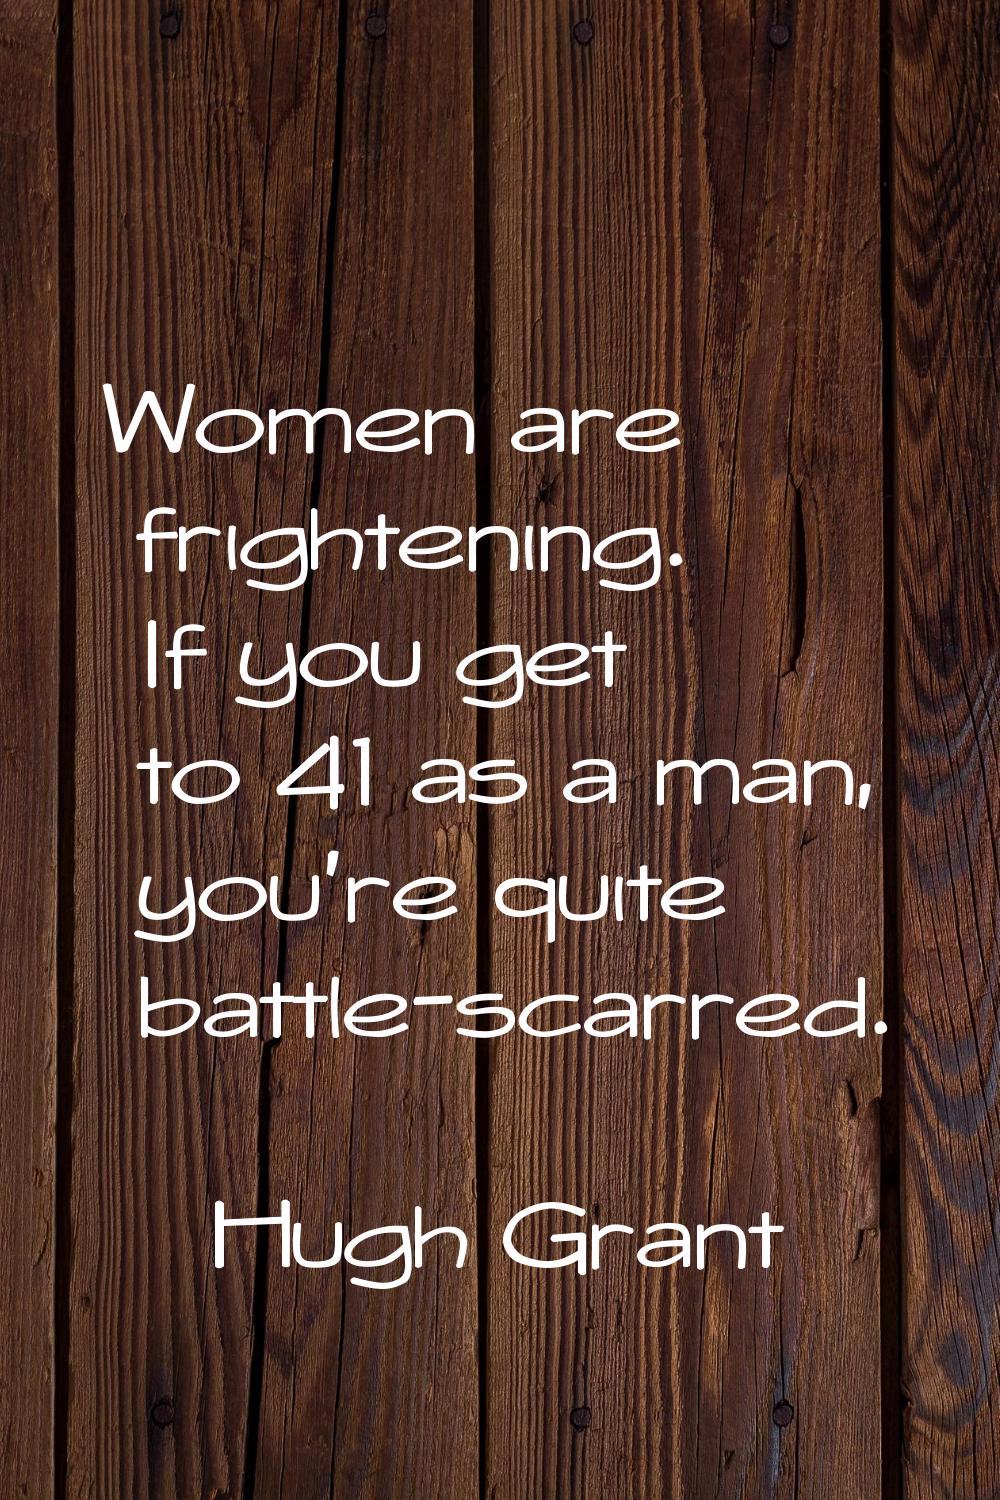 Women are frightening. If you get to 41 as a man, you're quite battle-scarred.